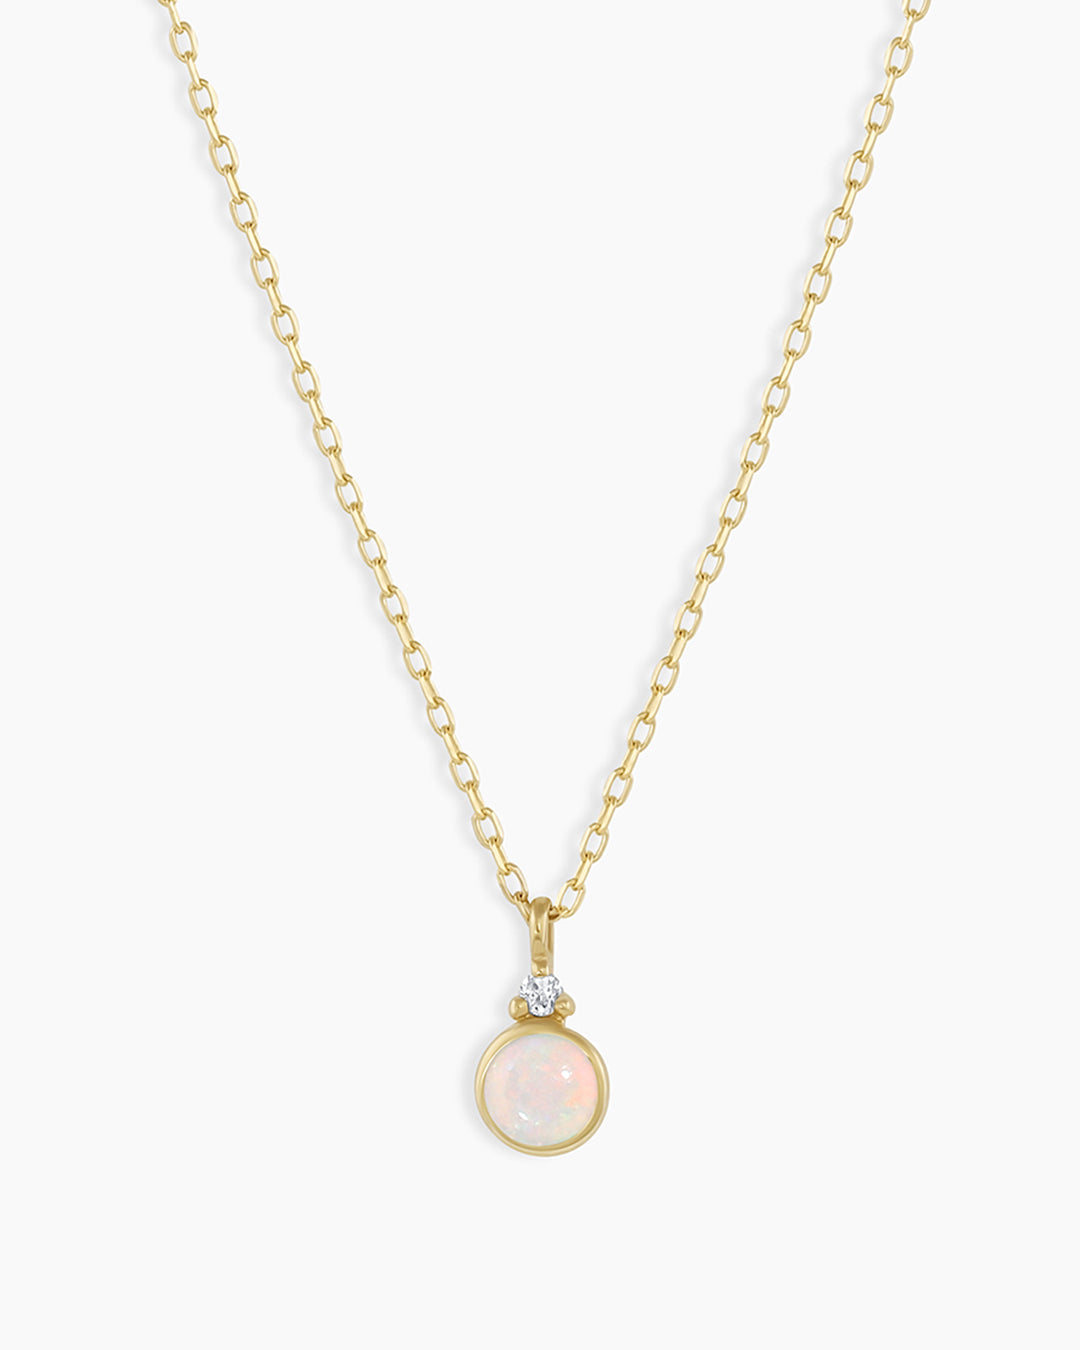 Layers Of The Sun 24 Kt Gold Plated Necklace With Pearl in Yellow